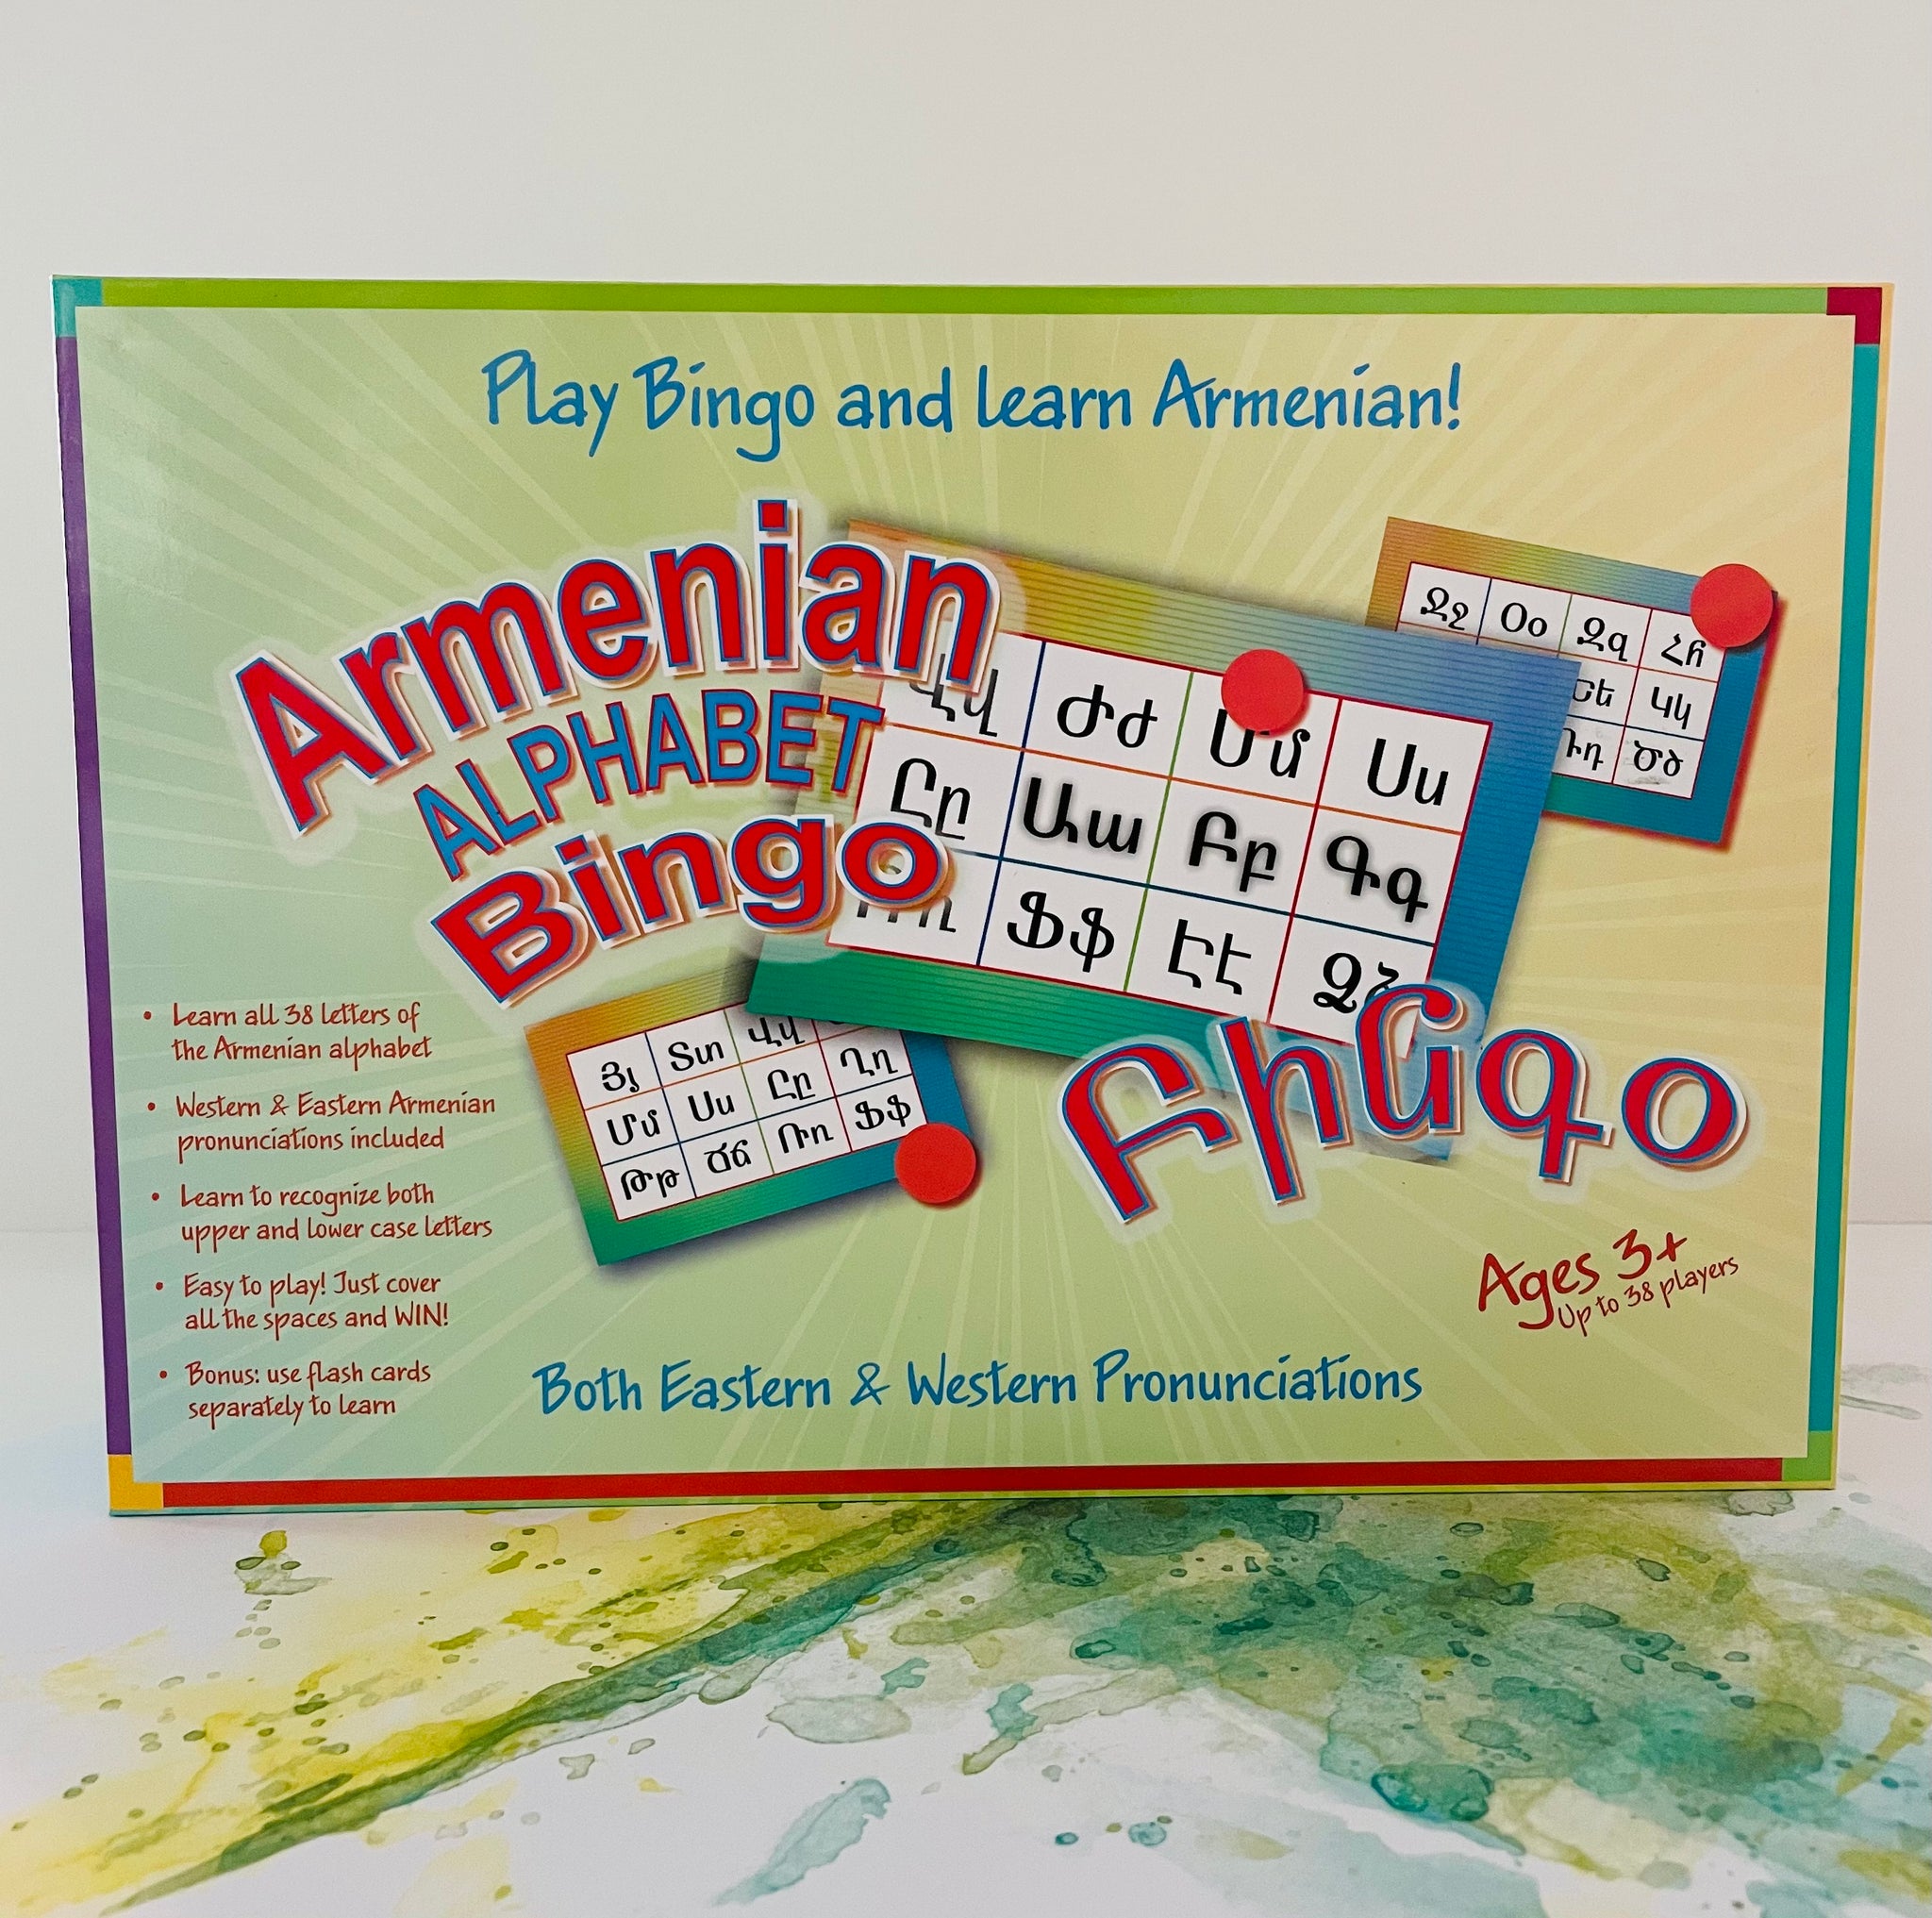 Armenian Alphabet Poster by Gus on the Go - AGBU Bookstore